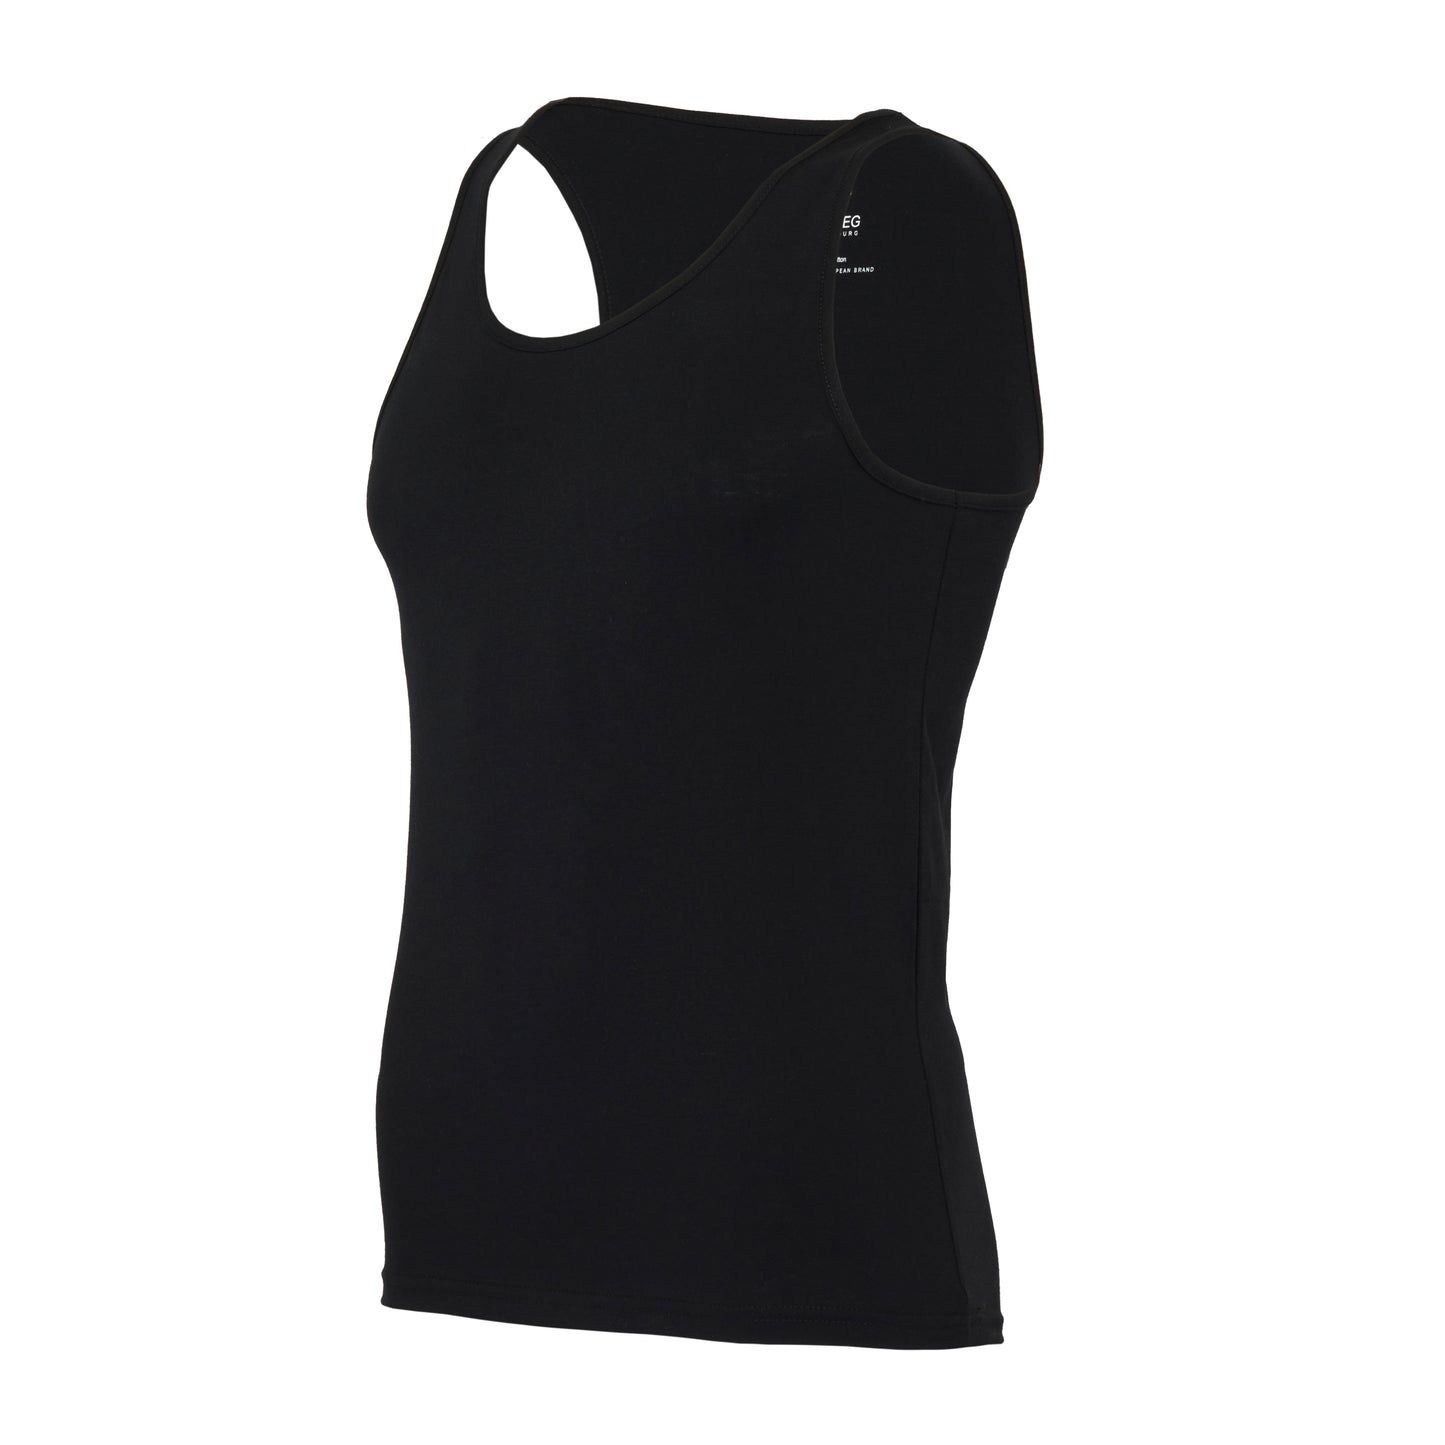 Black, body fit premium tanktops – pack of 2 or 4 – Sonneg Luxembourg